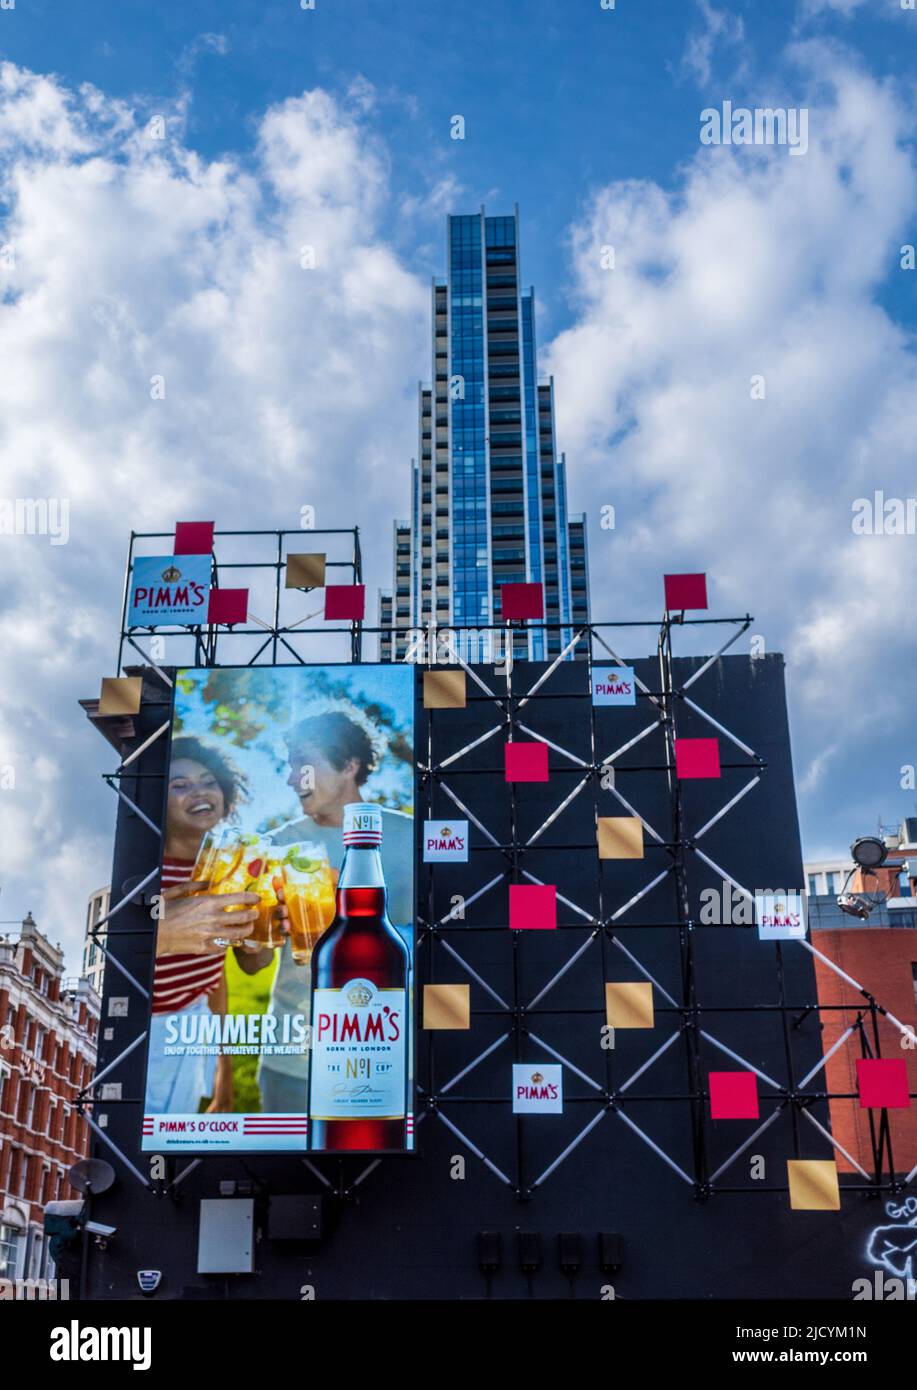 Pimms Advert in Shoreditch London - innovative electronic advertising hoardings near East London Tech City on Silicon Roundabout. Stock Photo